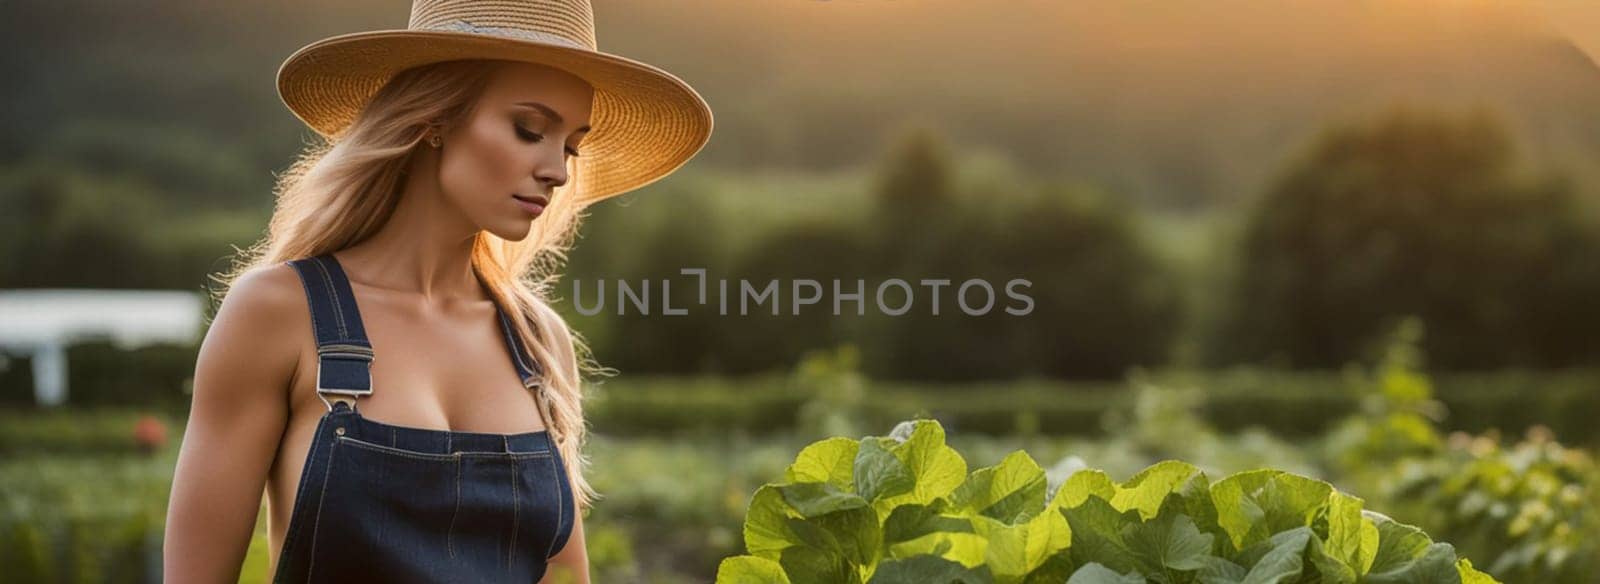 young adult woman farmer working in organic vegetable garden in the morning of sunny day by verbano